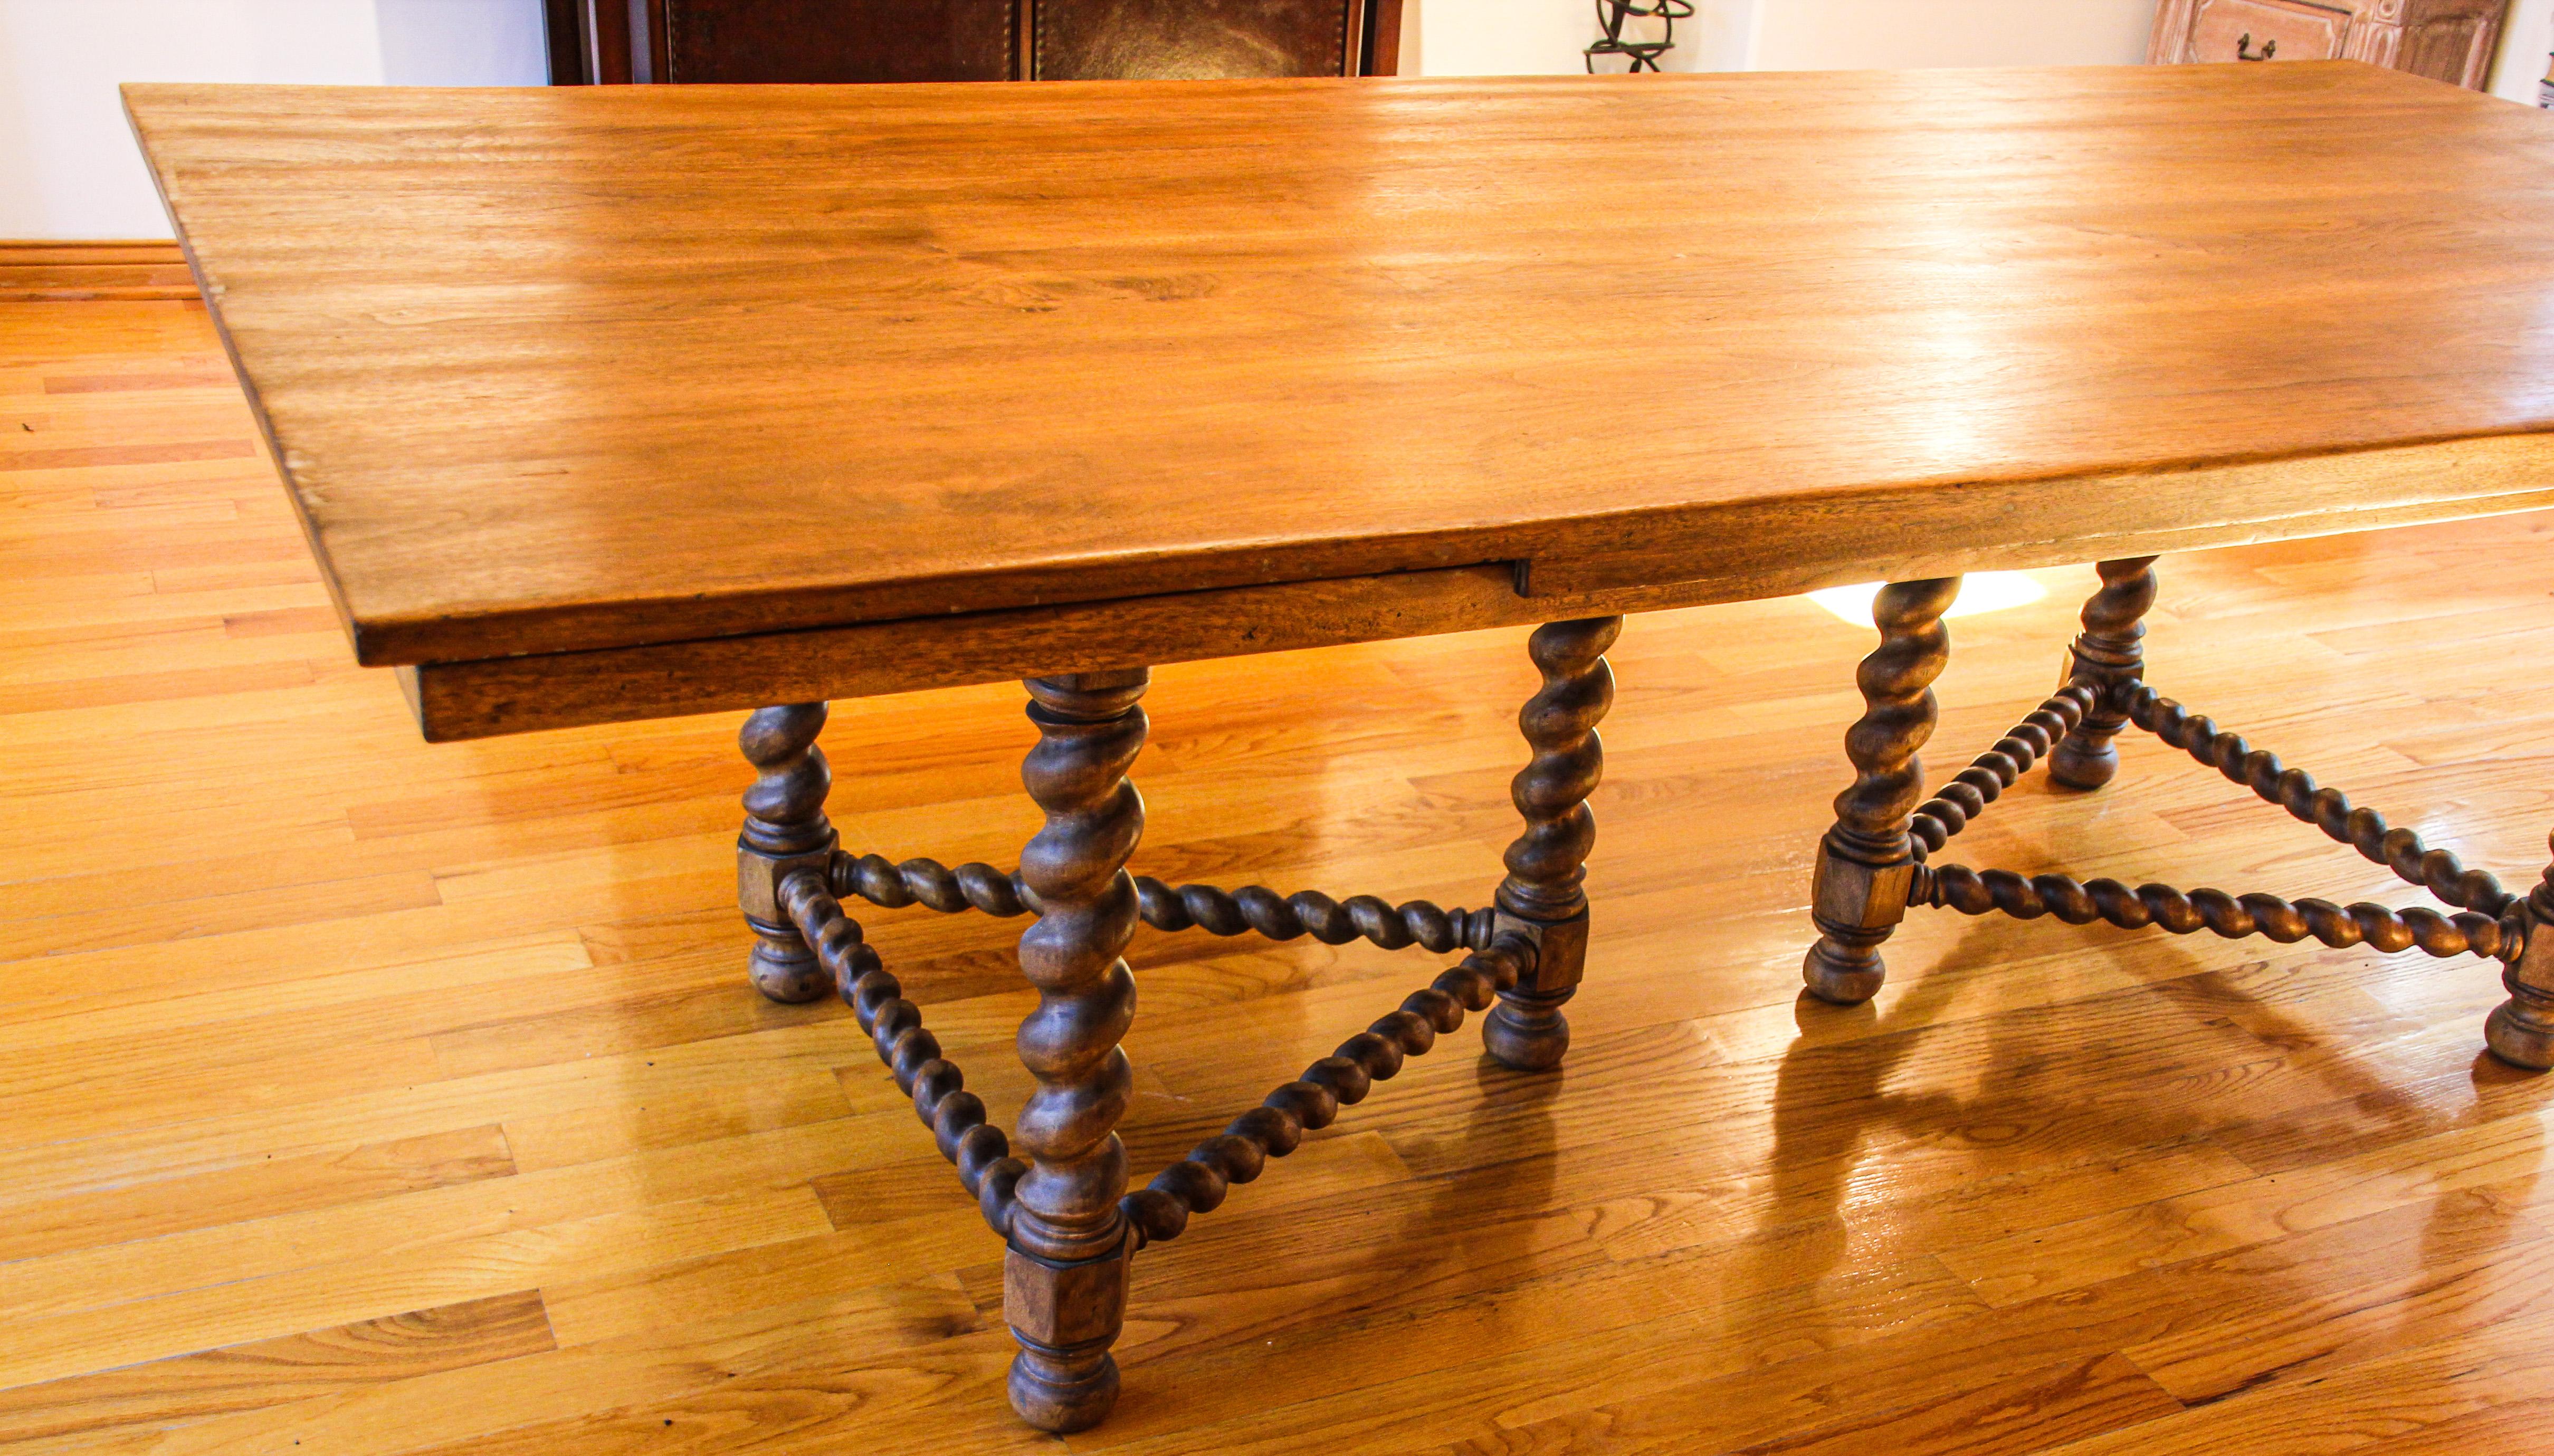 Hand-Crafted Antique Danish Dining Table with Turned Legs 19th Century